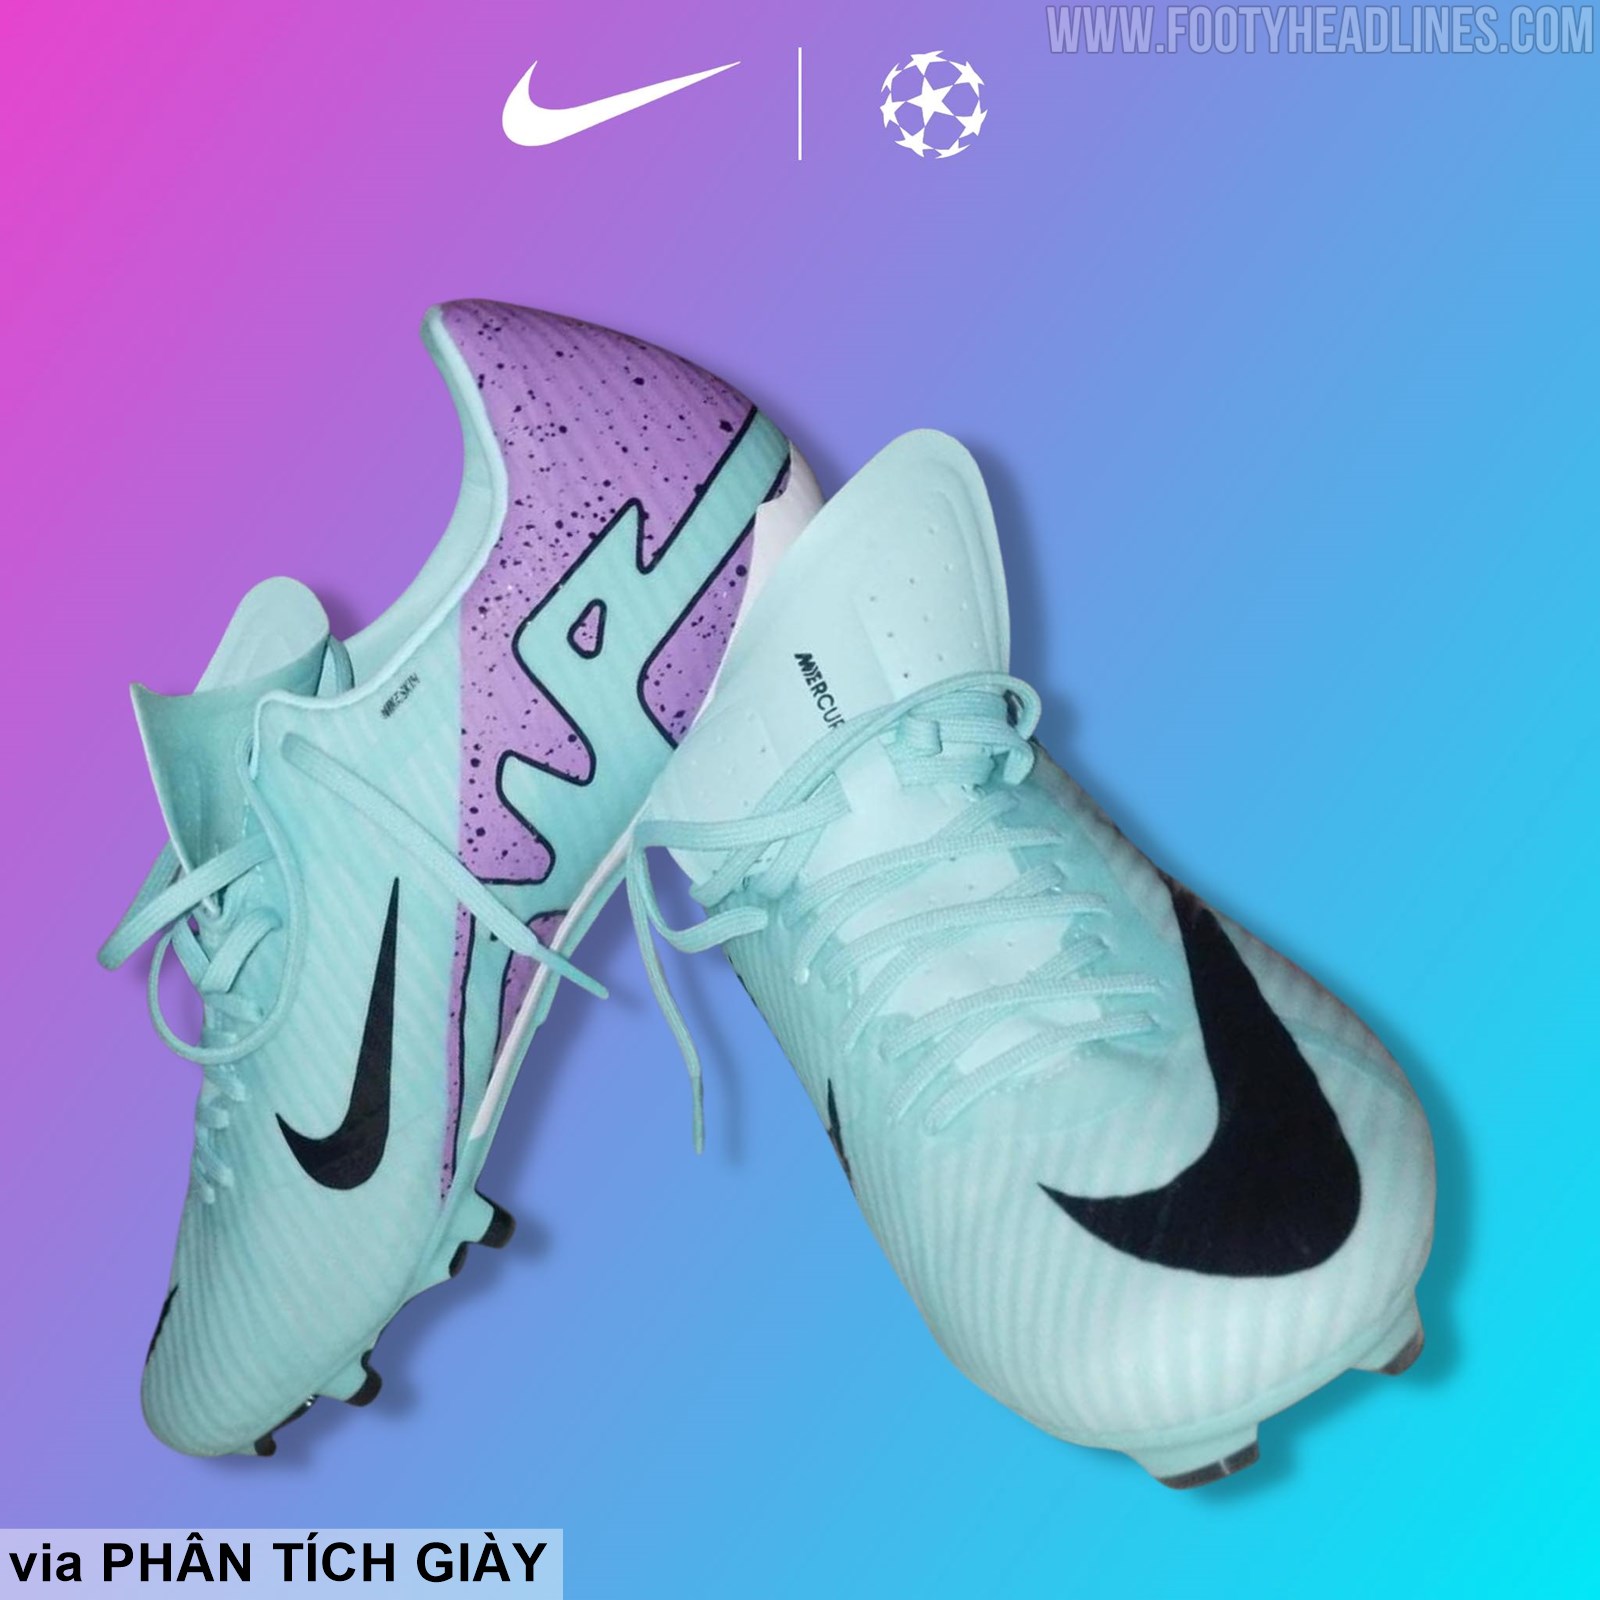 Exclusive: Nike to Release Special Boot Collection for Champions